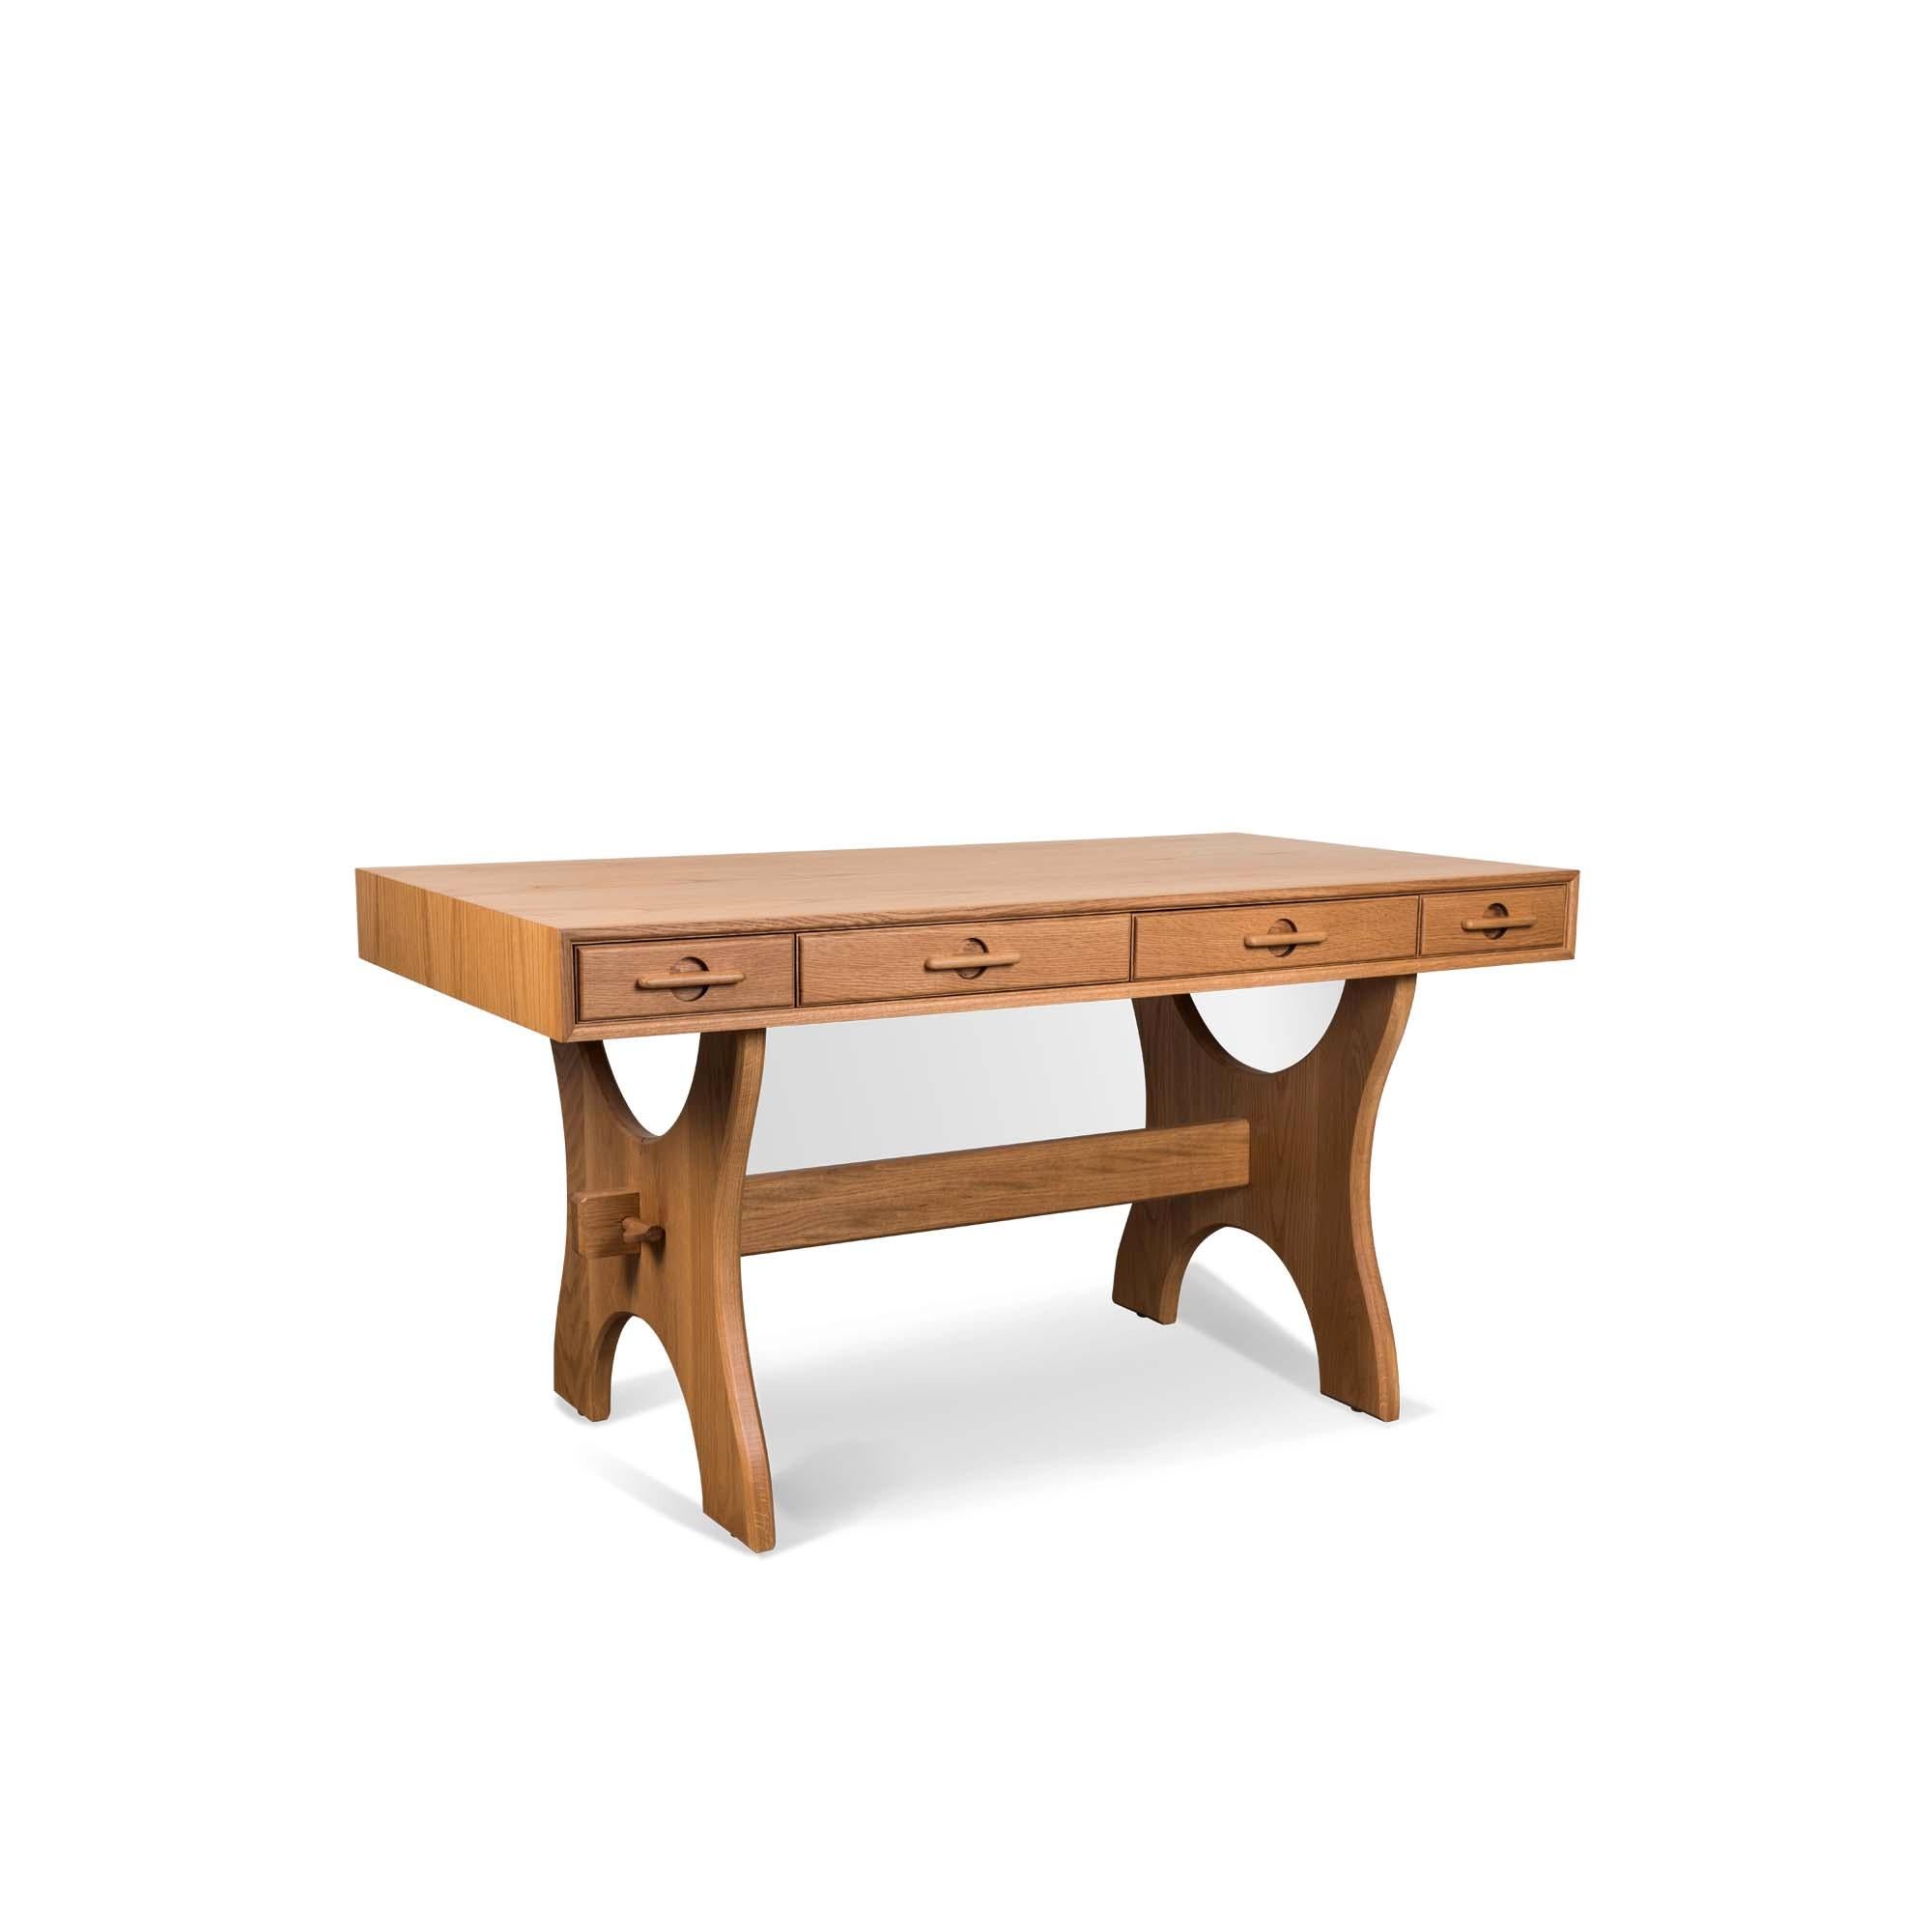 The Ojai desk has four drawers and features solid American walnut or white oak trestle legs. The drawer handles are made of solid carved wood. 

The Lawson-Fenning Ccollection is designed and handmade in Los Angeles, California. Reach out to